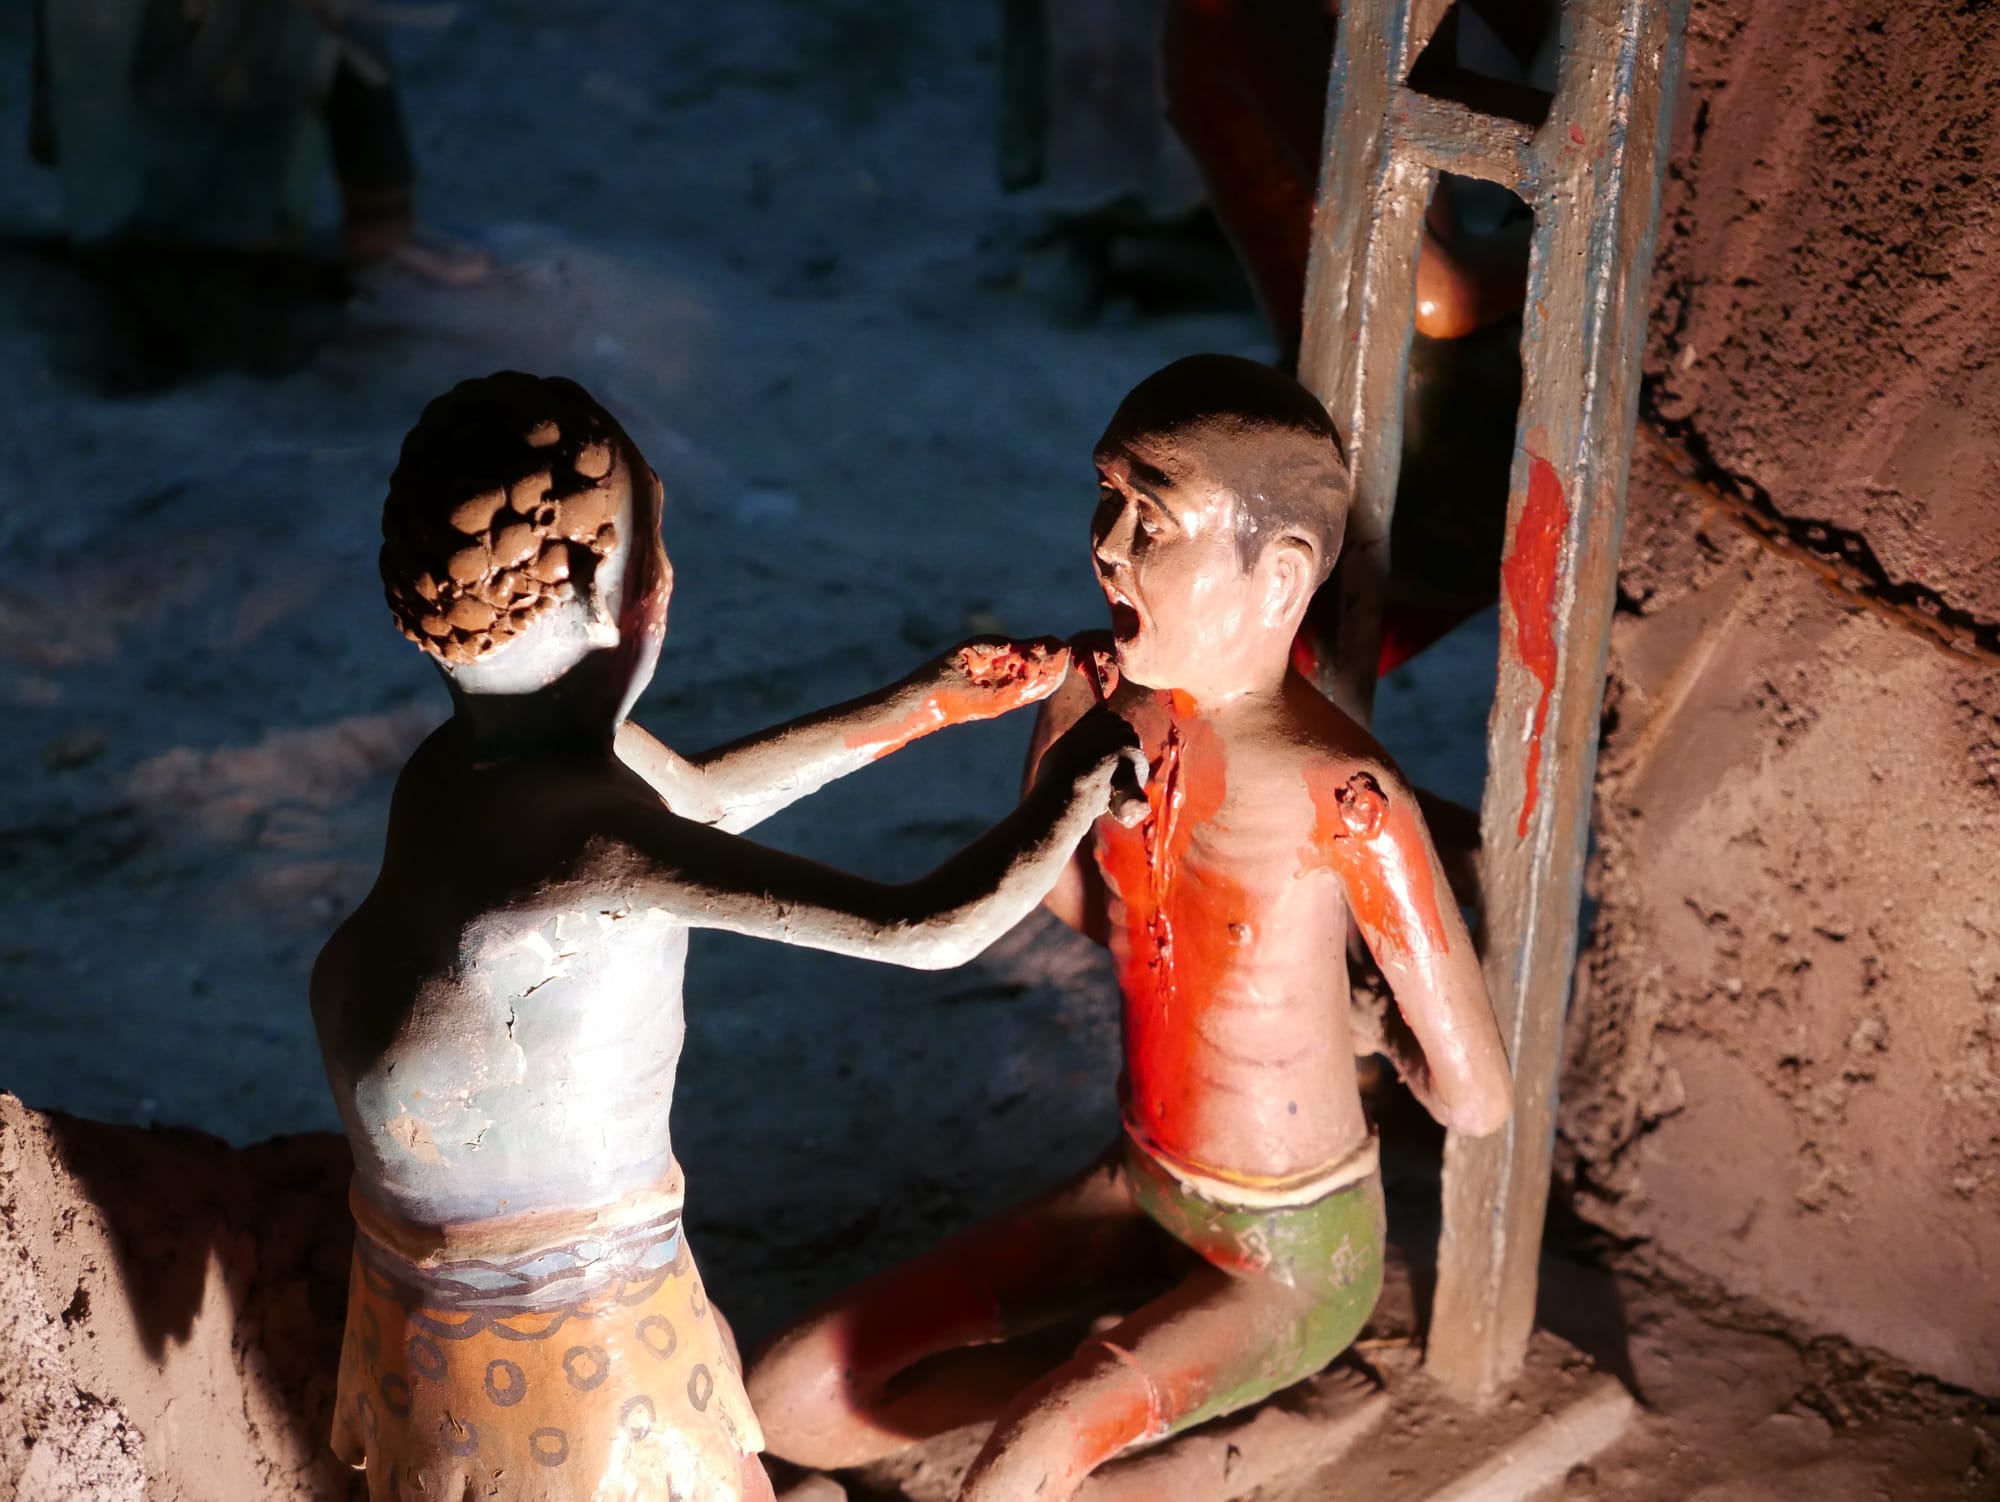 Photo by Author — tongue pulled out — Seventh Court of Hell (King Taishan) — 10 Courts of Hell, Haw Par Villa, Singapore